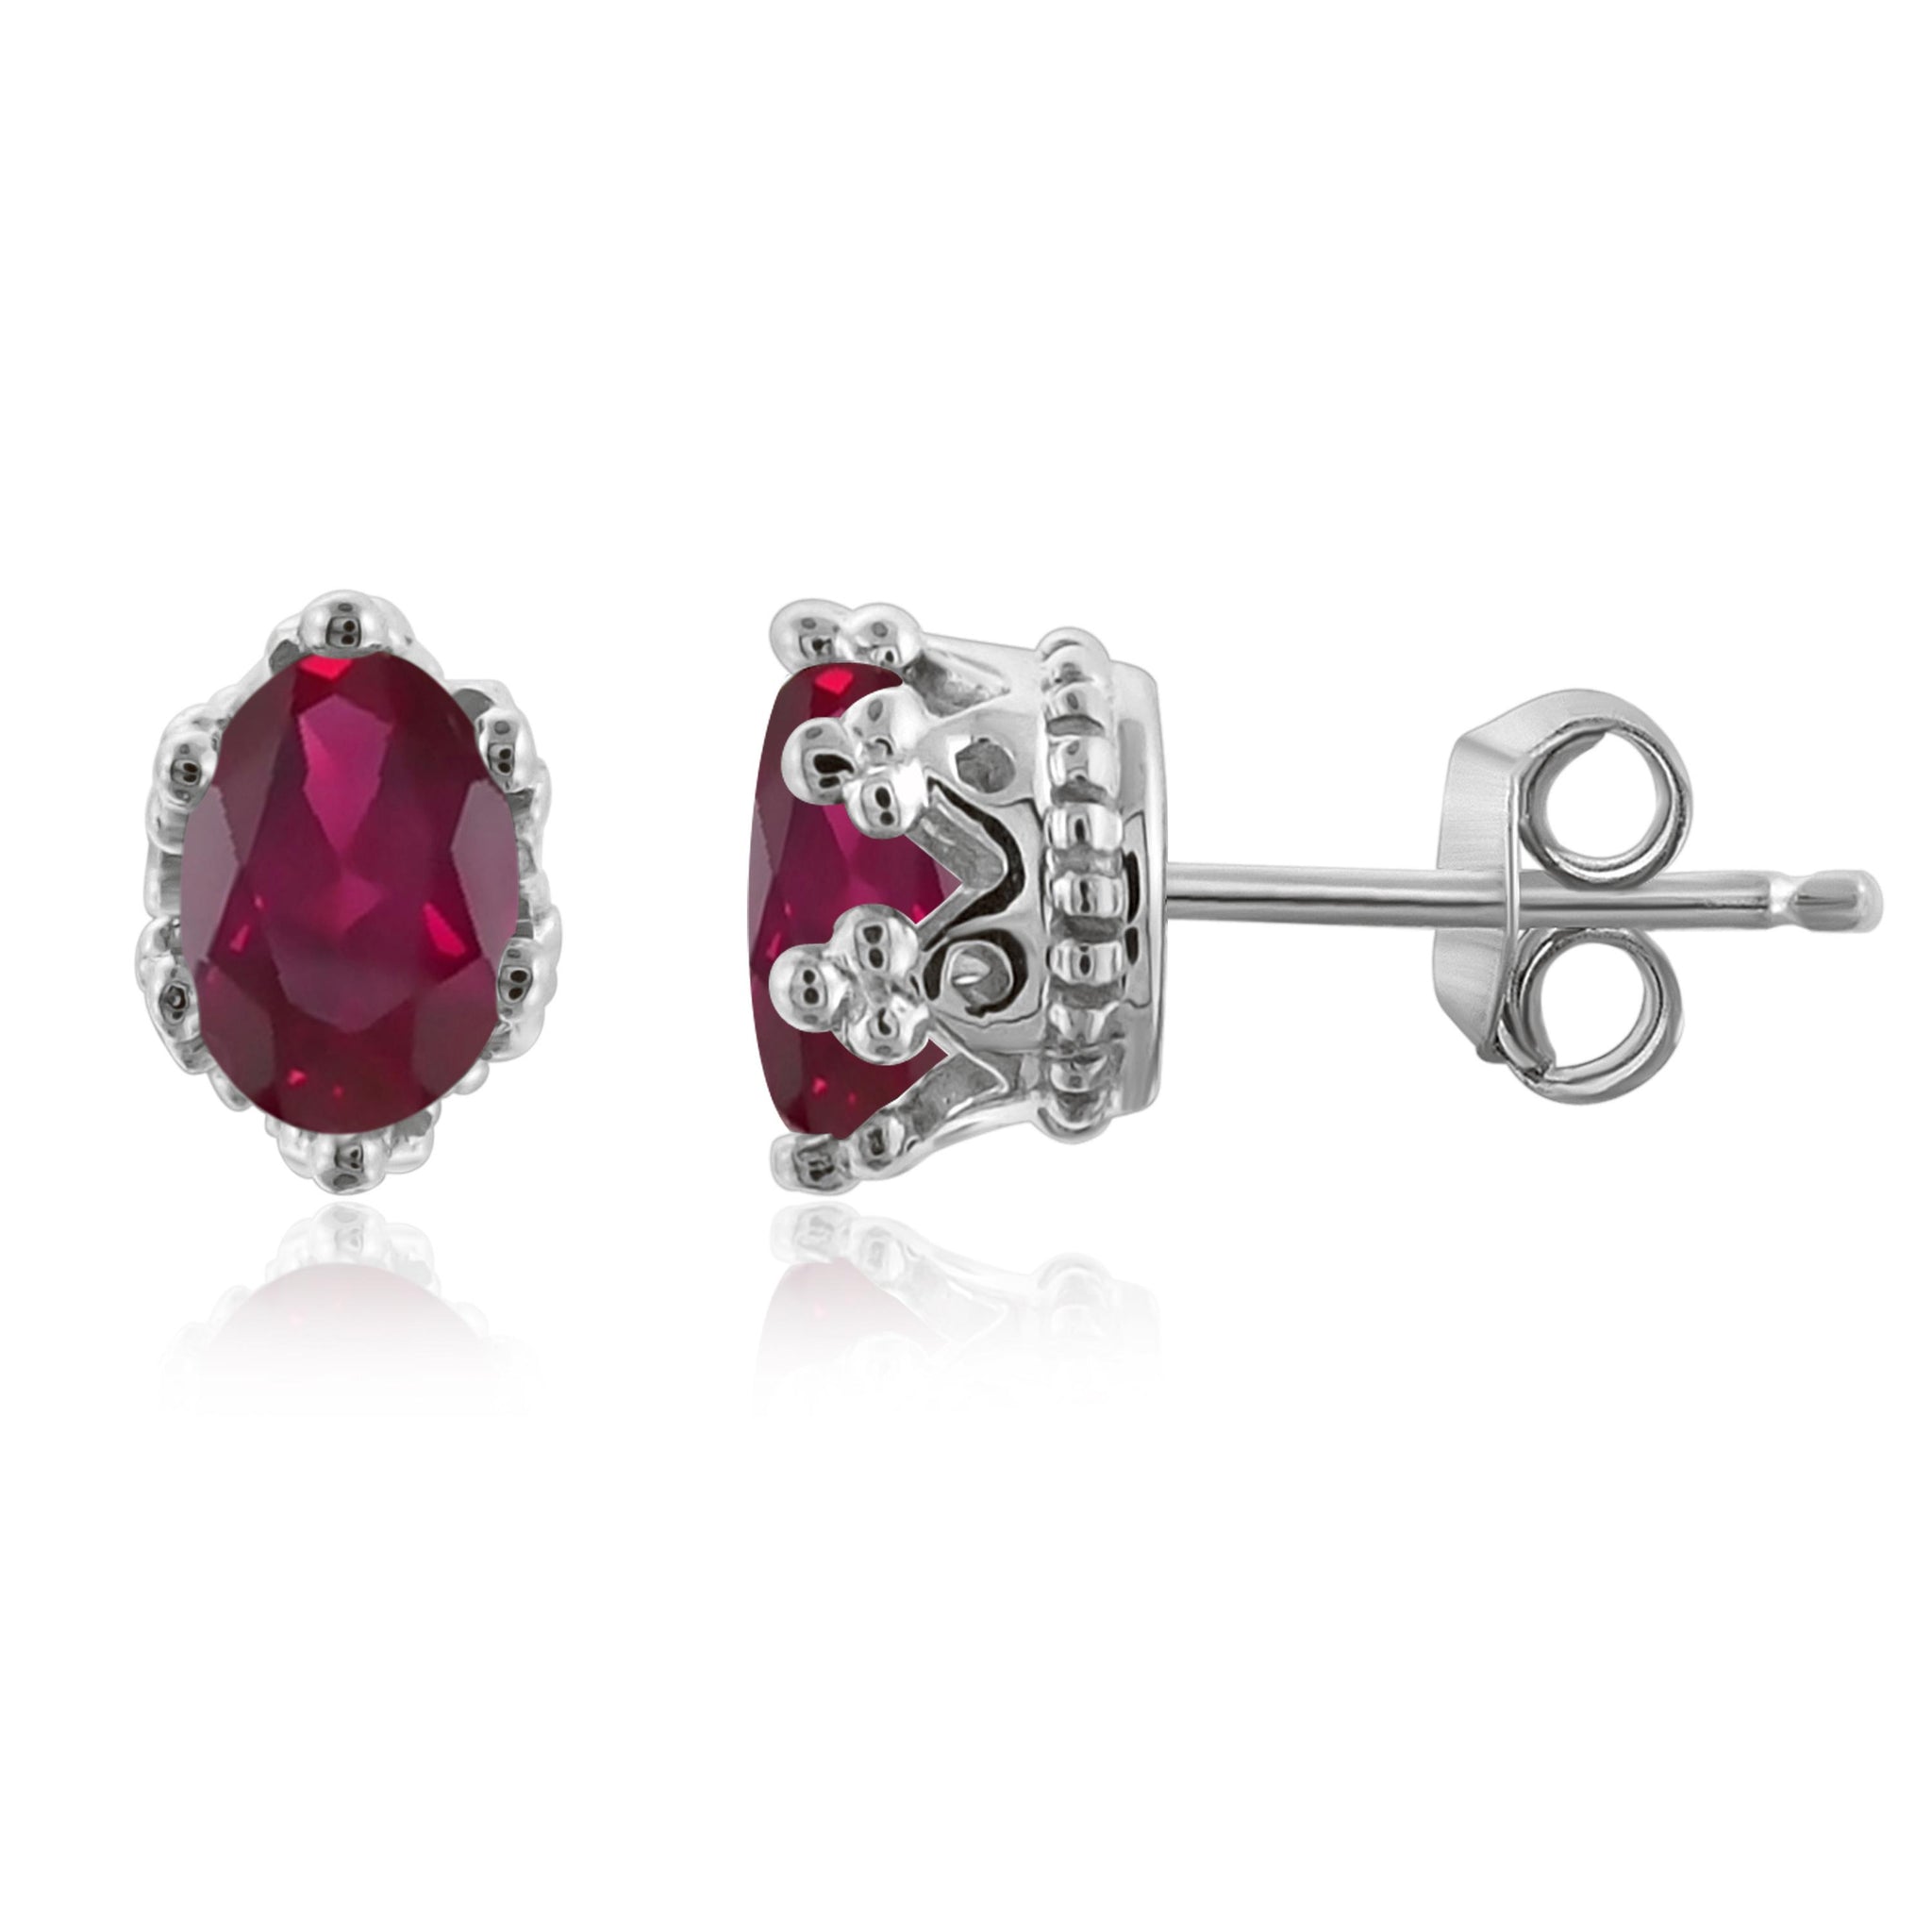 JewelonFire 0.90 Carat T.G.W. Ruby Sterling Silver Earrings - Assorted Colors